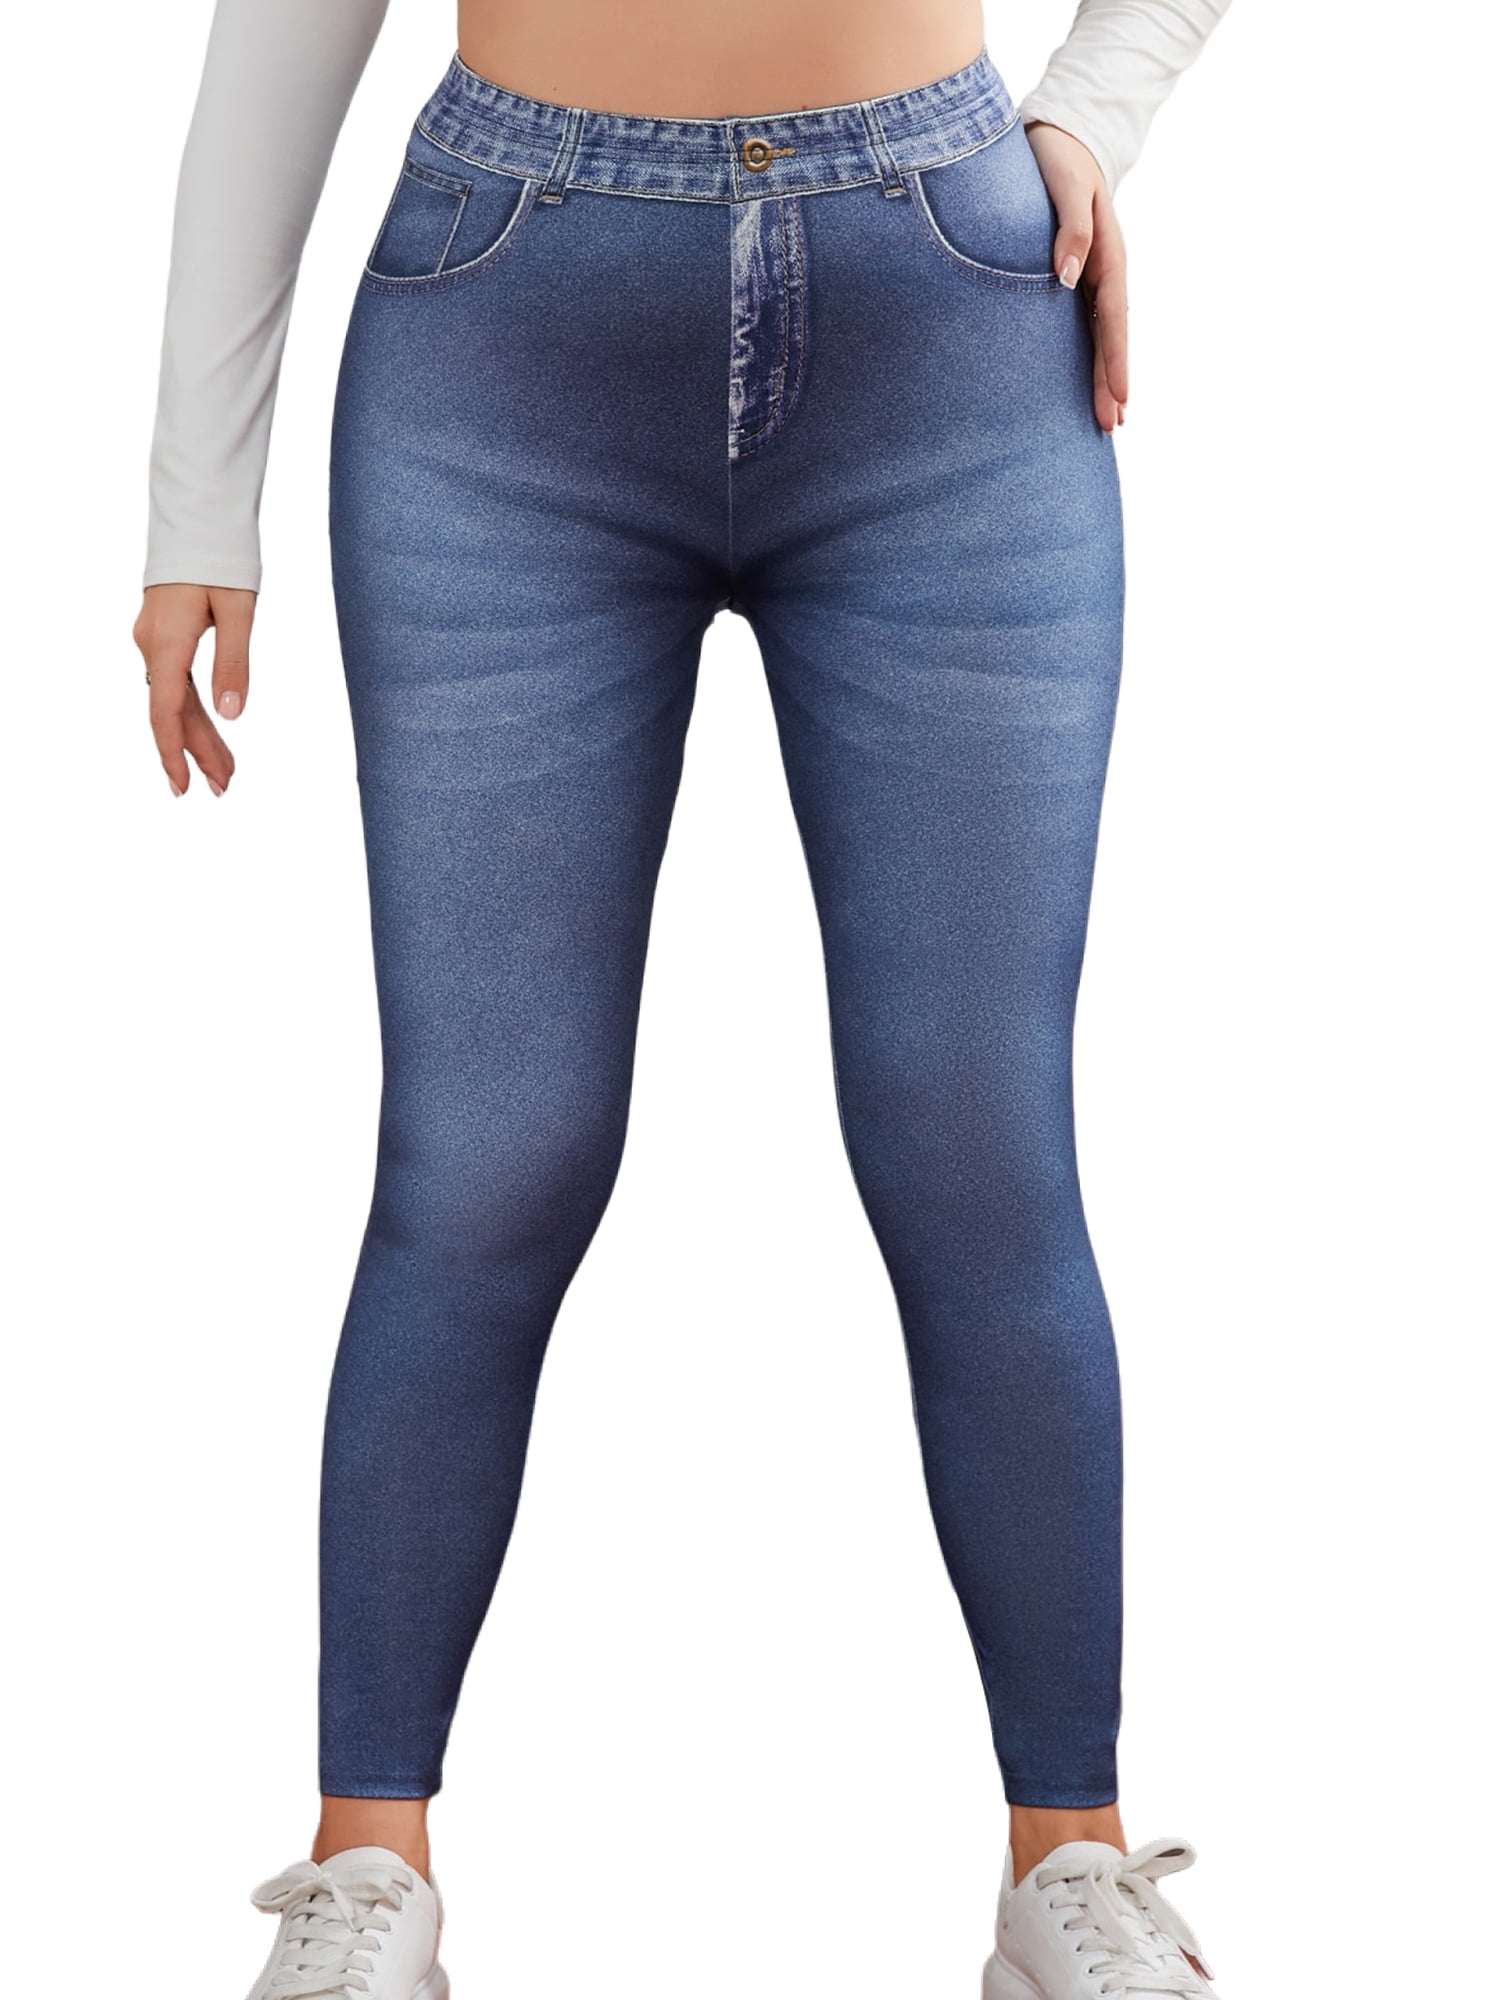 MAWCLOS Ladies Faux Jeans Pant Solid Color Jeggings Tummy Control Leggings  Stretch Running Denim Print Trousers Light Blue XS 